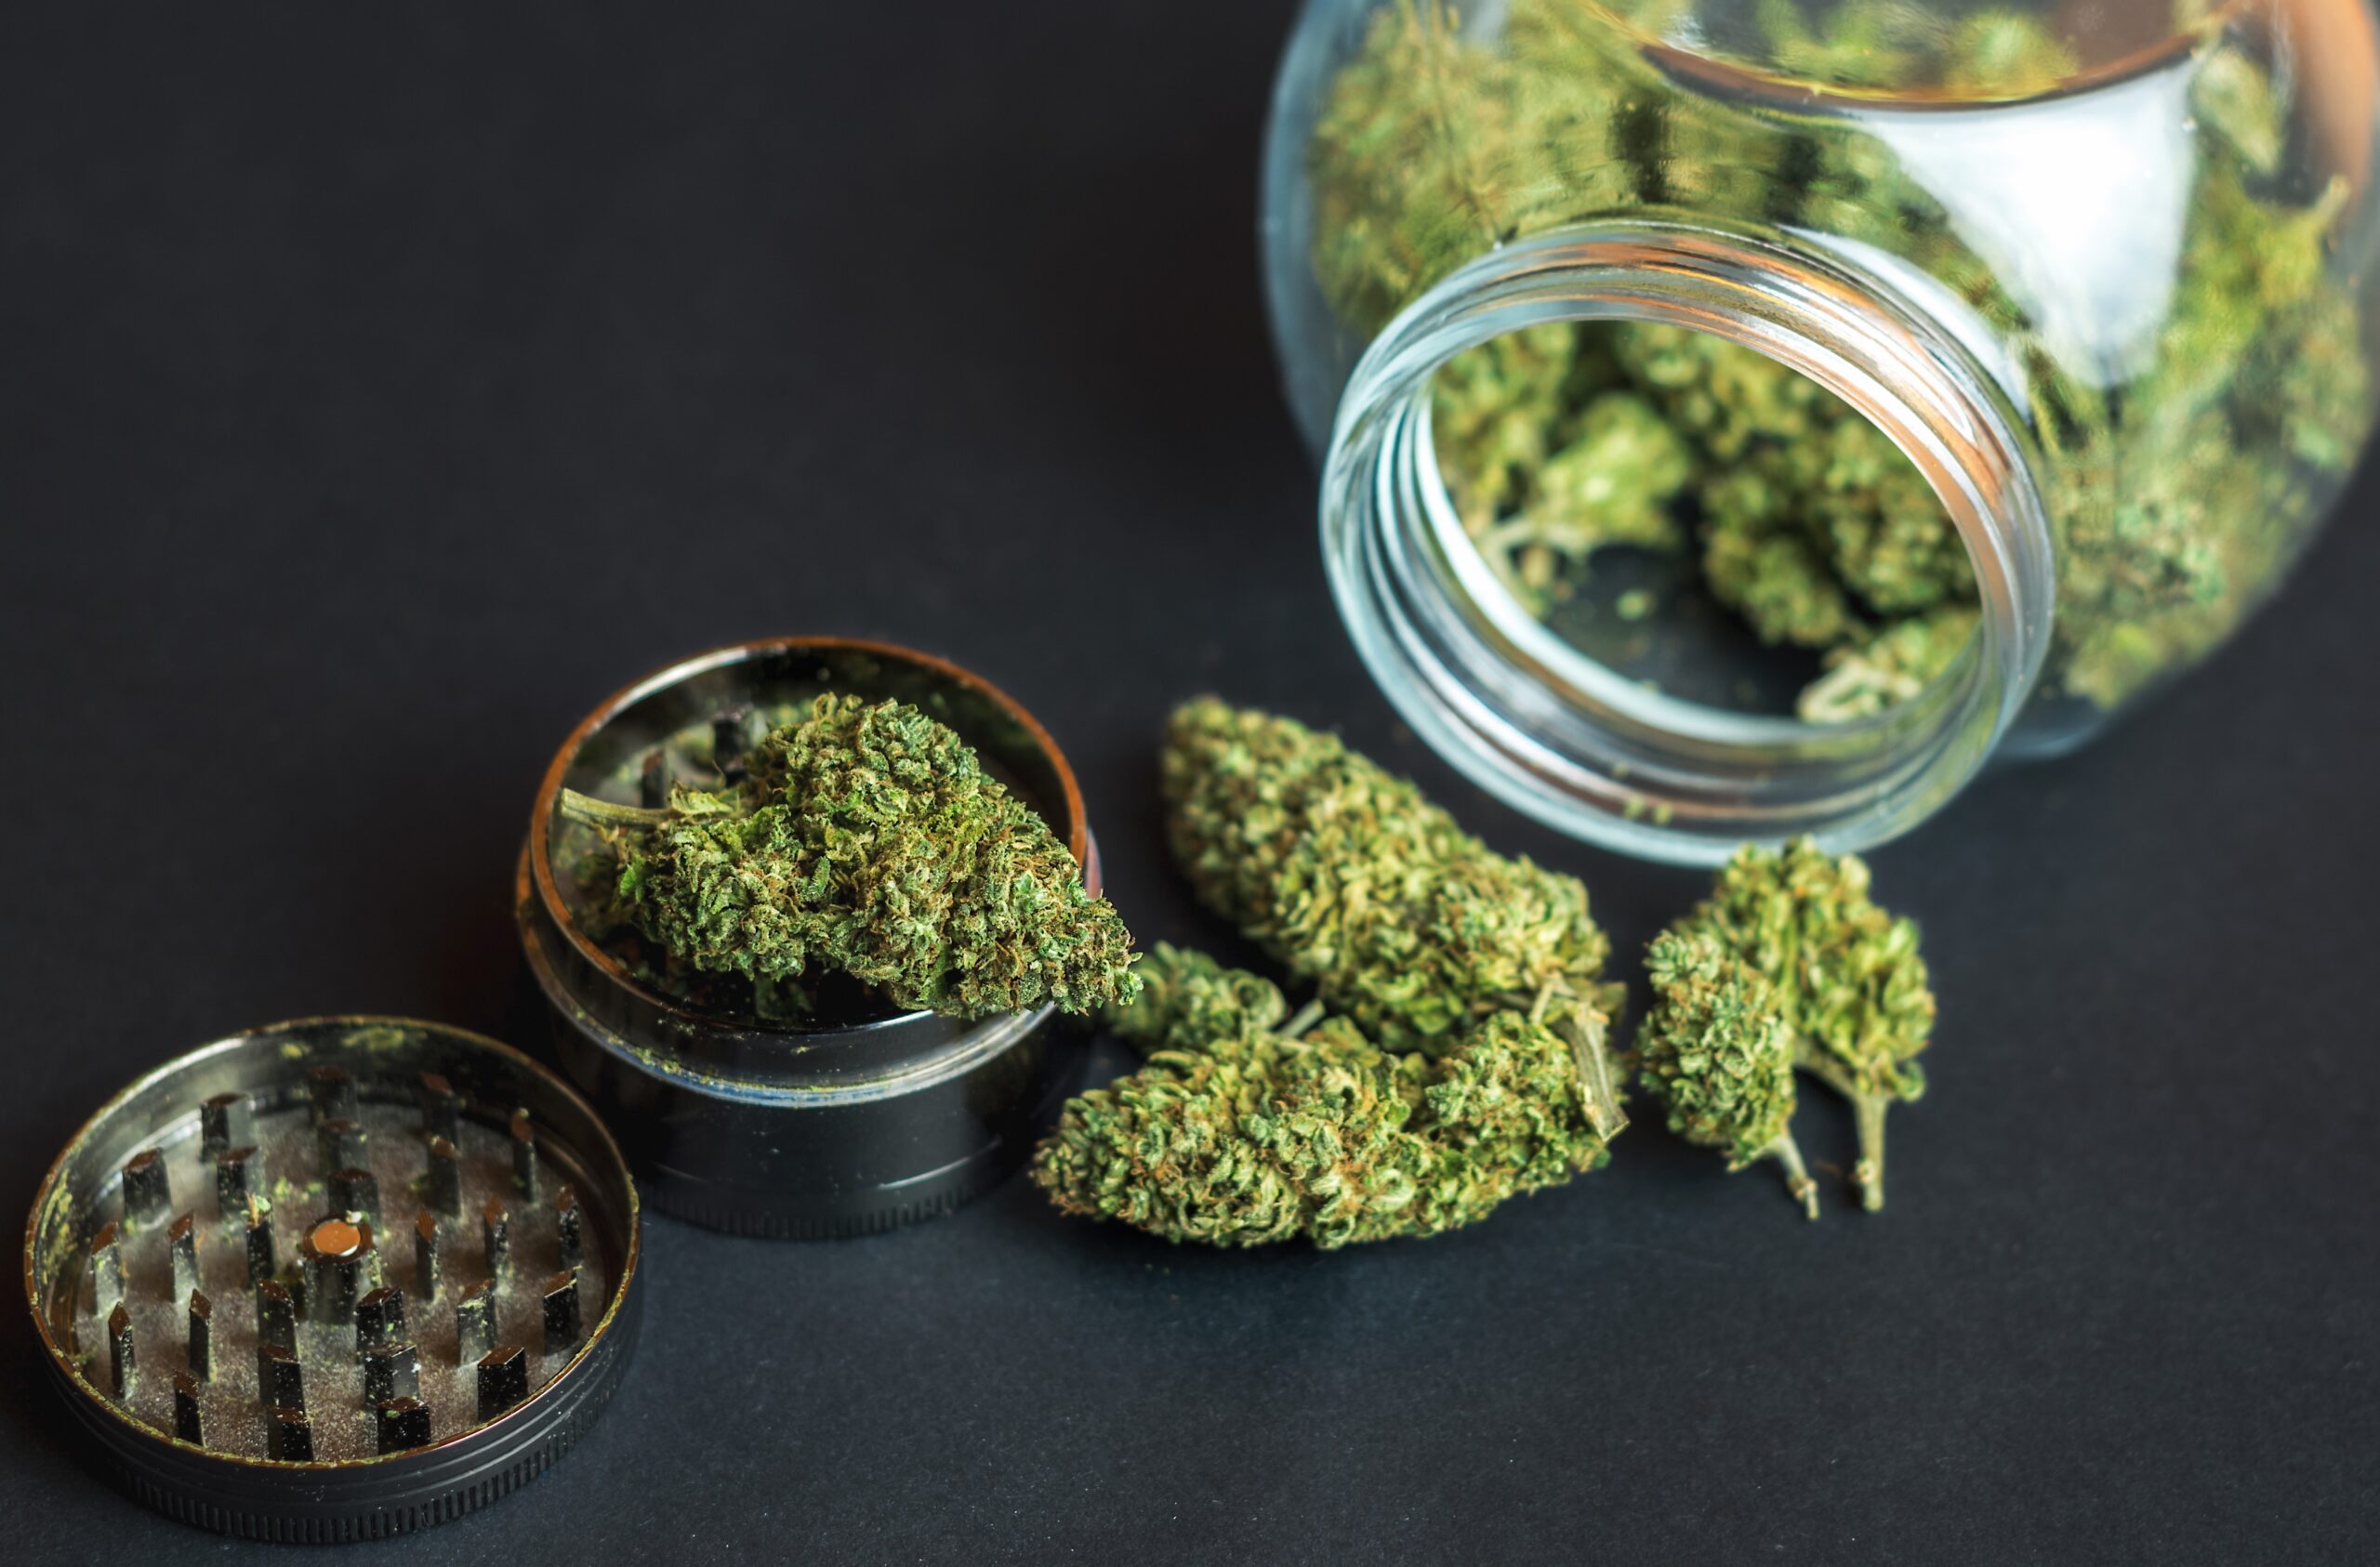 Fluresh Tackles Immense Growth with Data-driven Microsoft Dynamics 365 Business Central and Silverleaf Cannabis Solution